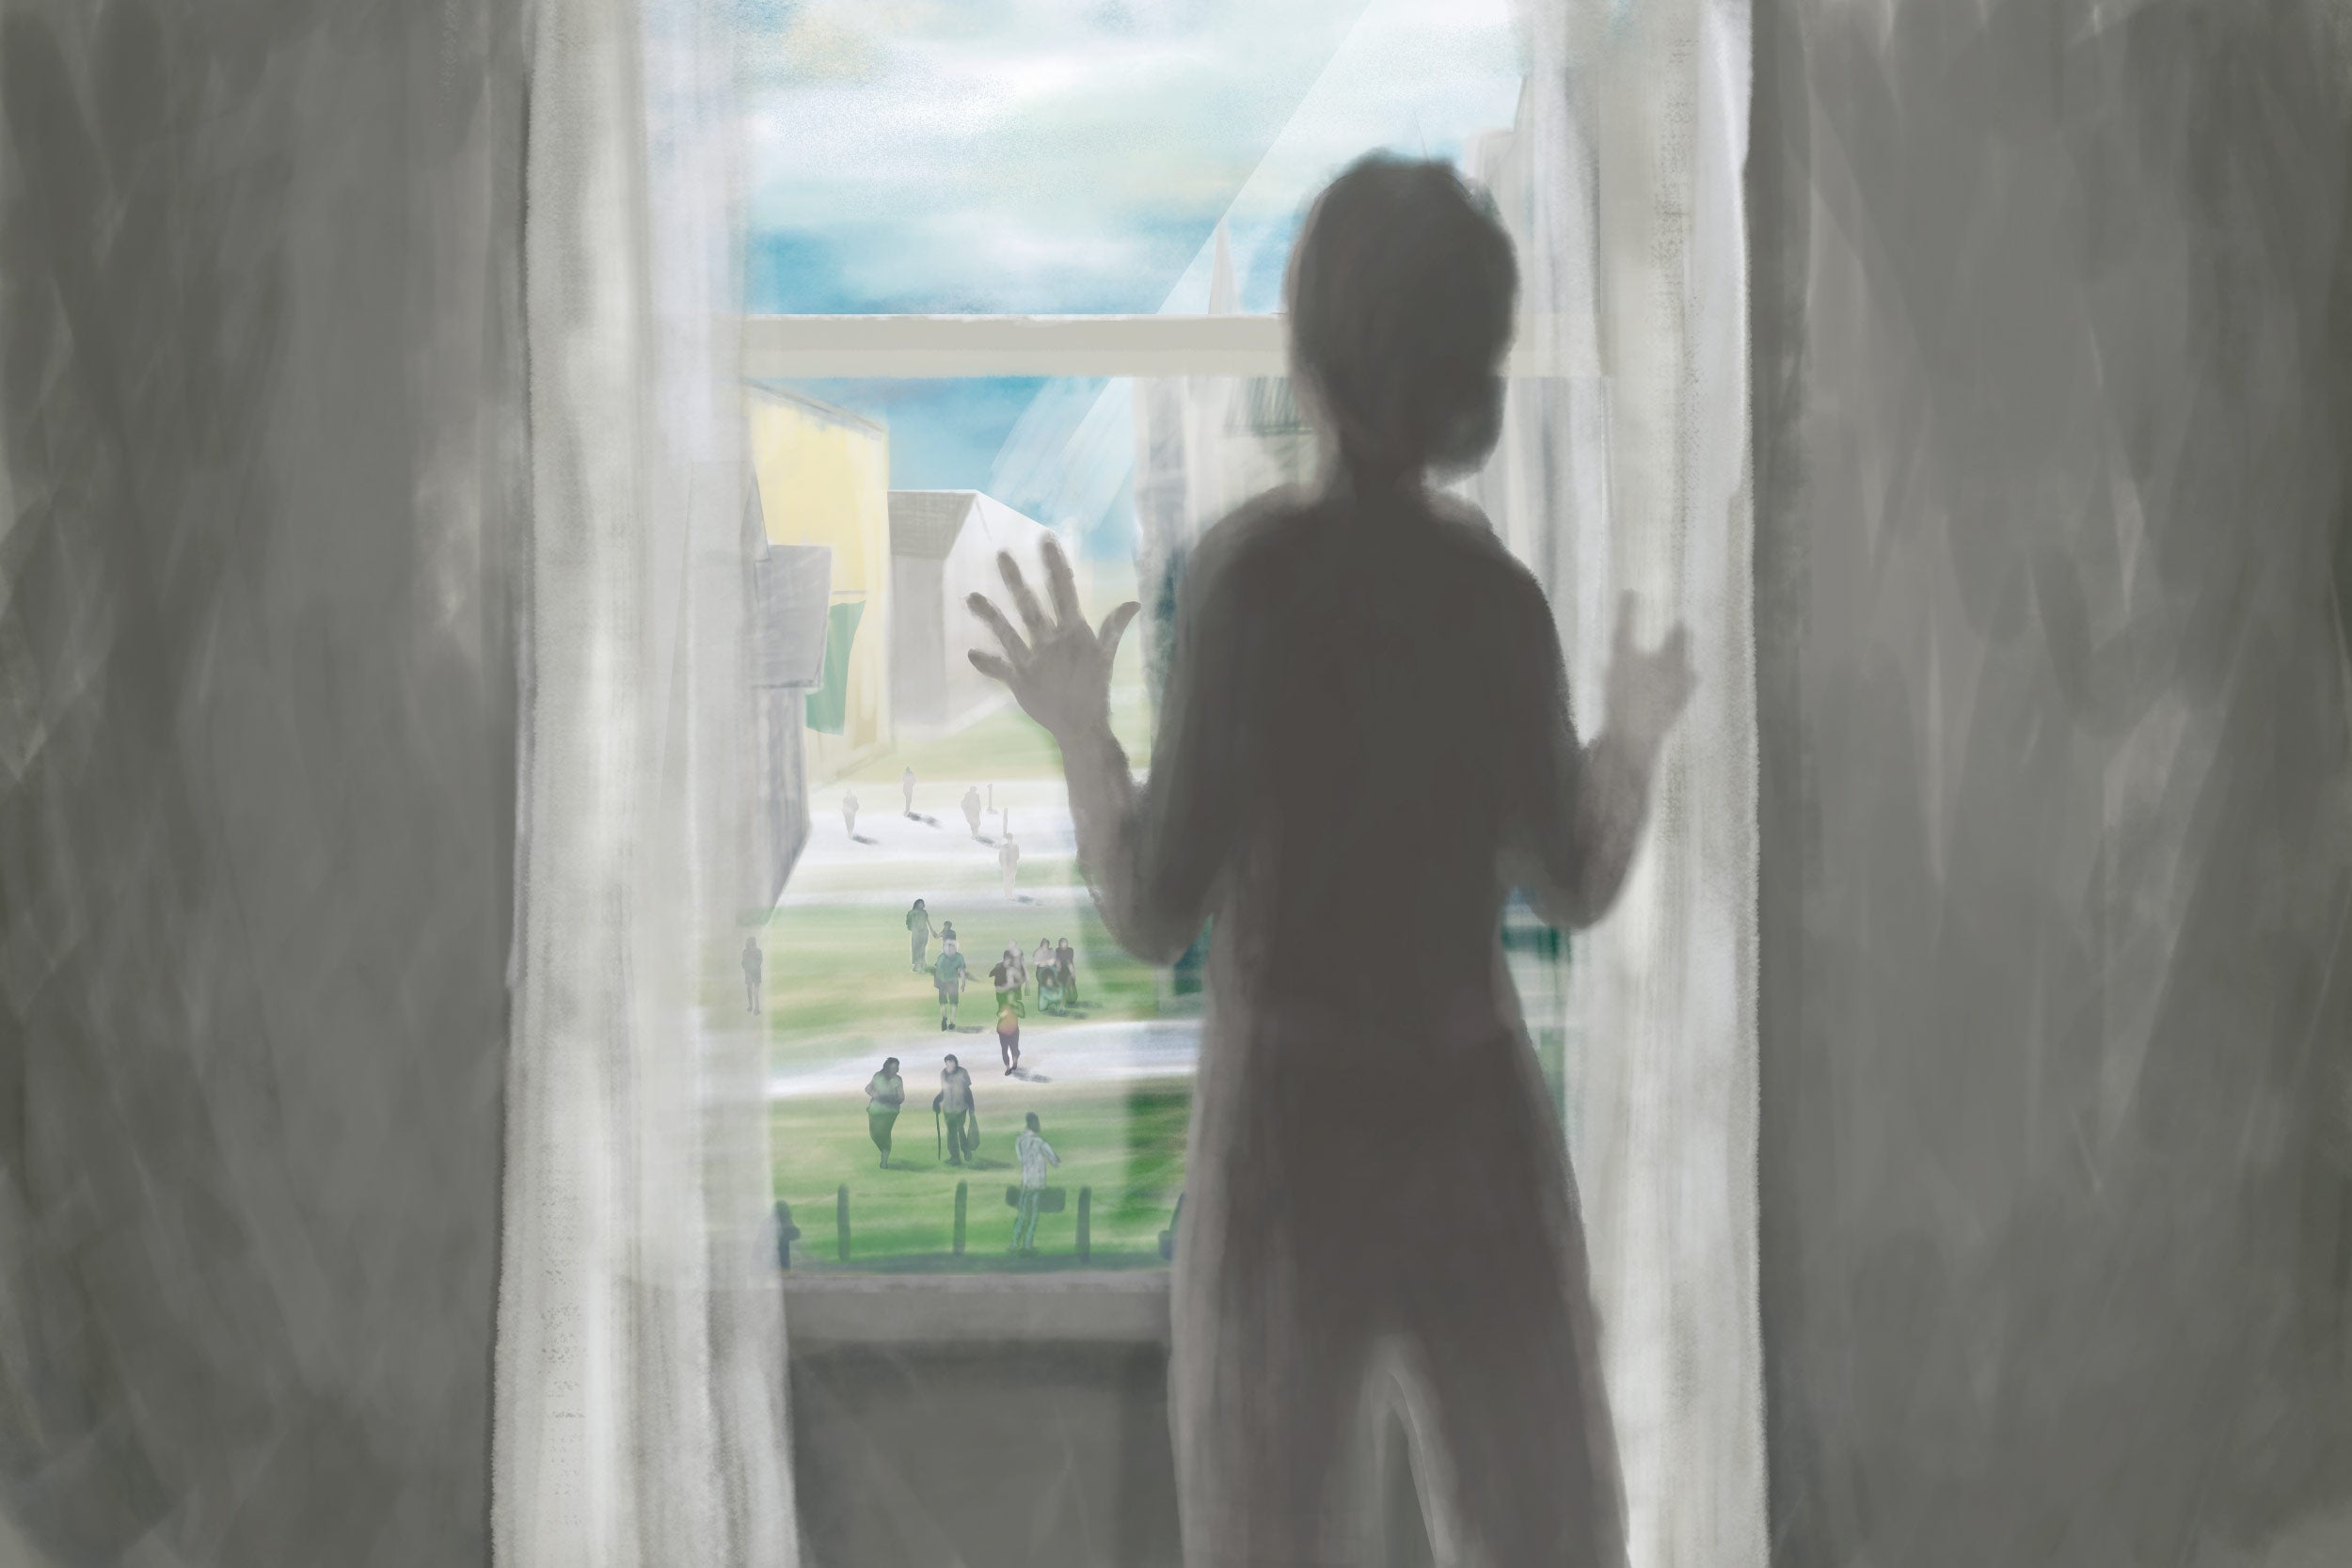 Illustration of a woman standing at a window looking out longingly at people walking outside